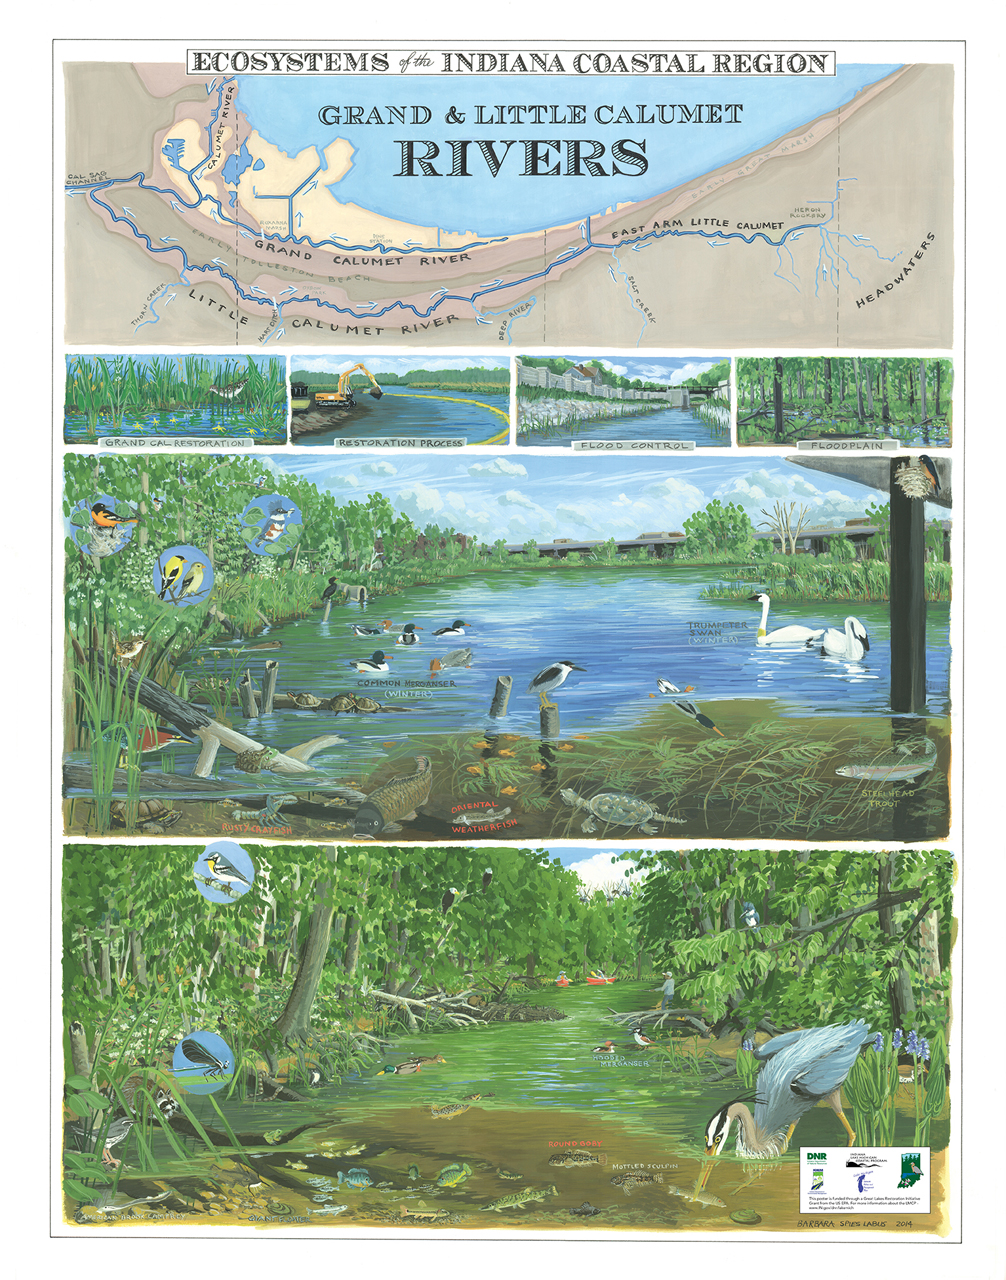 Image shows waterfowl along tree-lined rivers, with the words “Grand and Little Calumet Rivers” and “Ecosystems of the Indiana Coastal Region.”